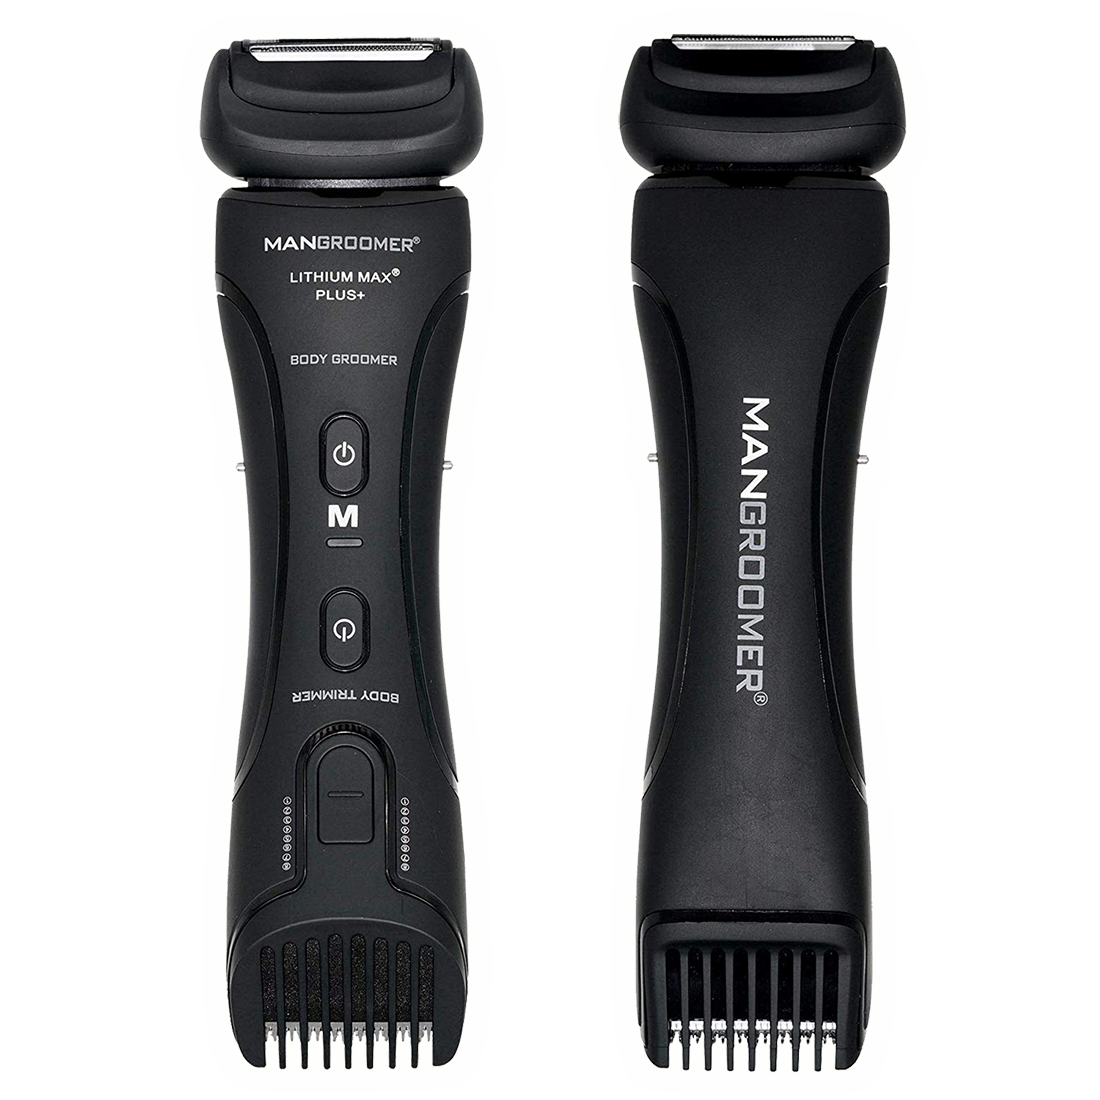 MANGROOMER ULTIMATE PRO Body Groomer and Trimmer Specifications